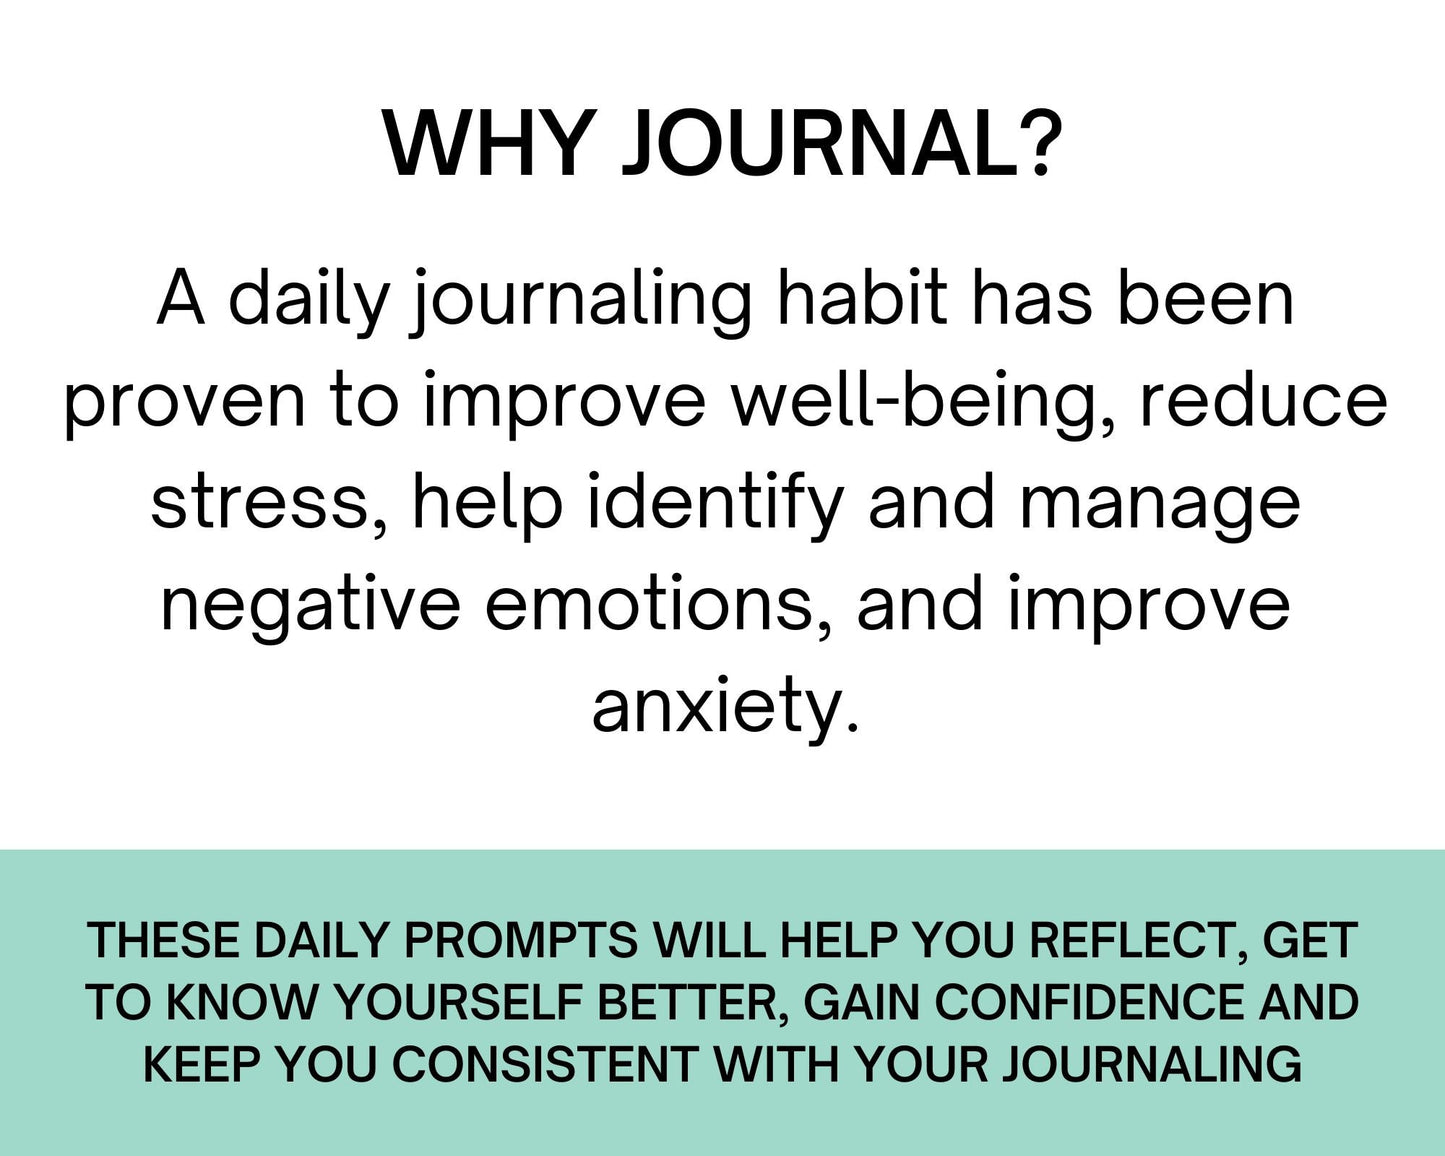 365 Daily Journal Prompts With Journal Pages - Simplify Create Inspire